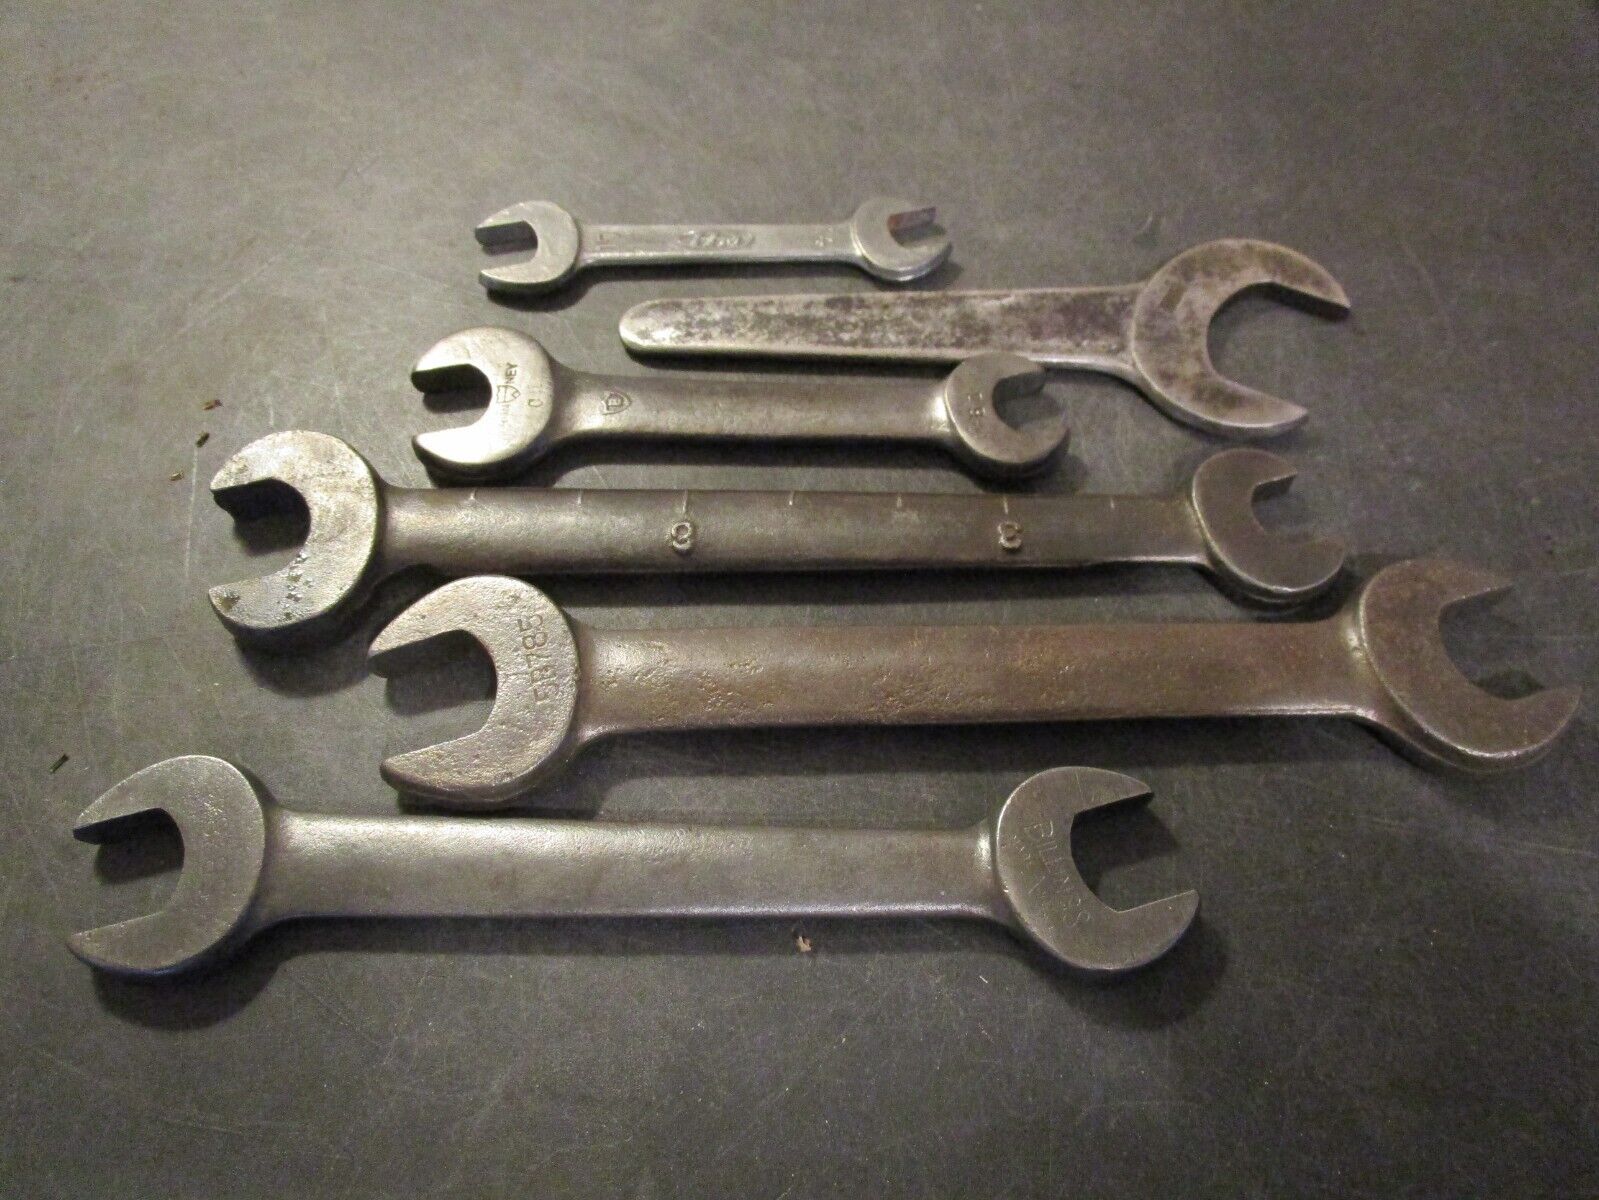 LOT OF 6 VINTAGE FARM IMPLEMENT MECHANIC WRENCHES MULTIPLE BRANDS & SIZES, NICE